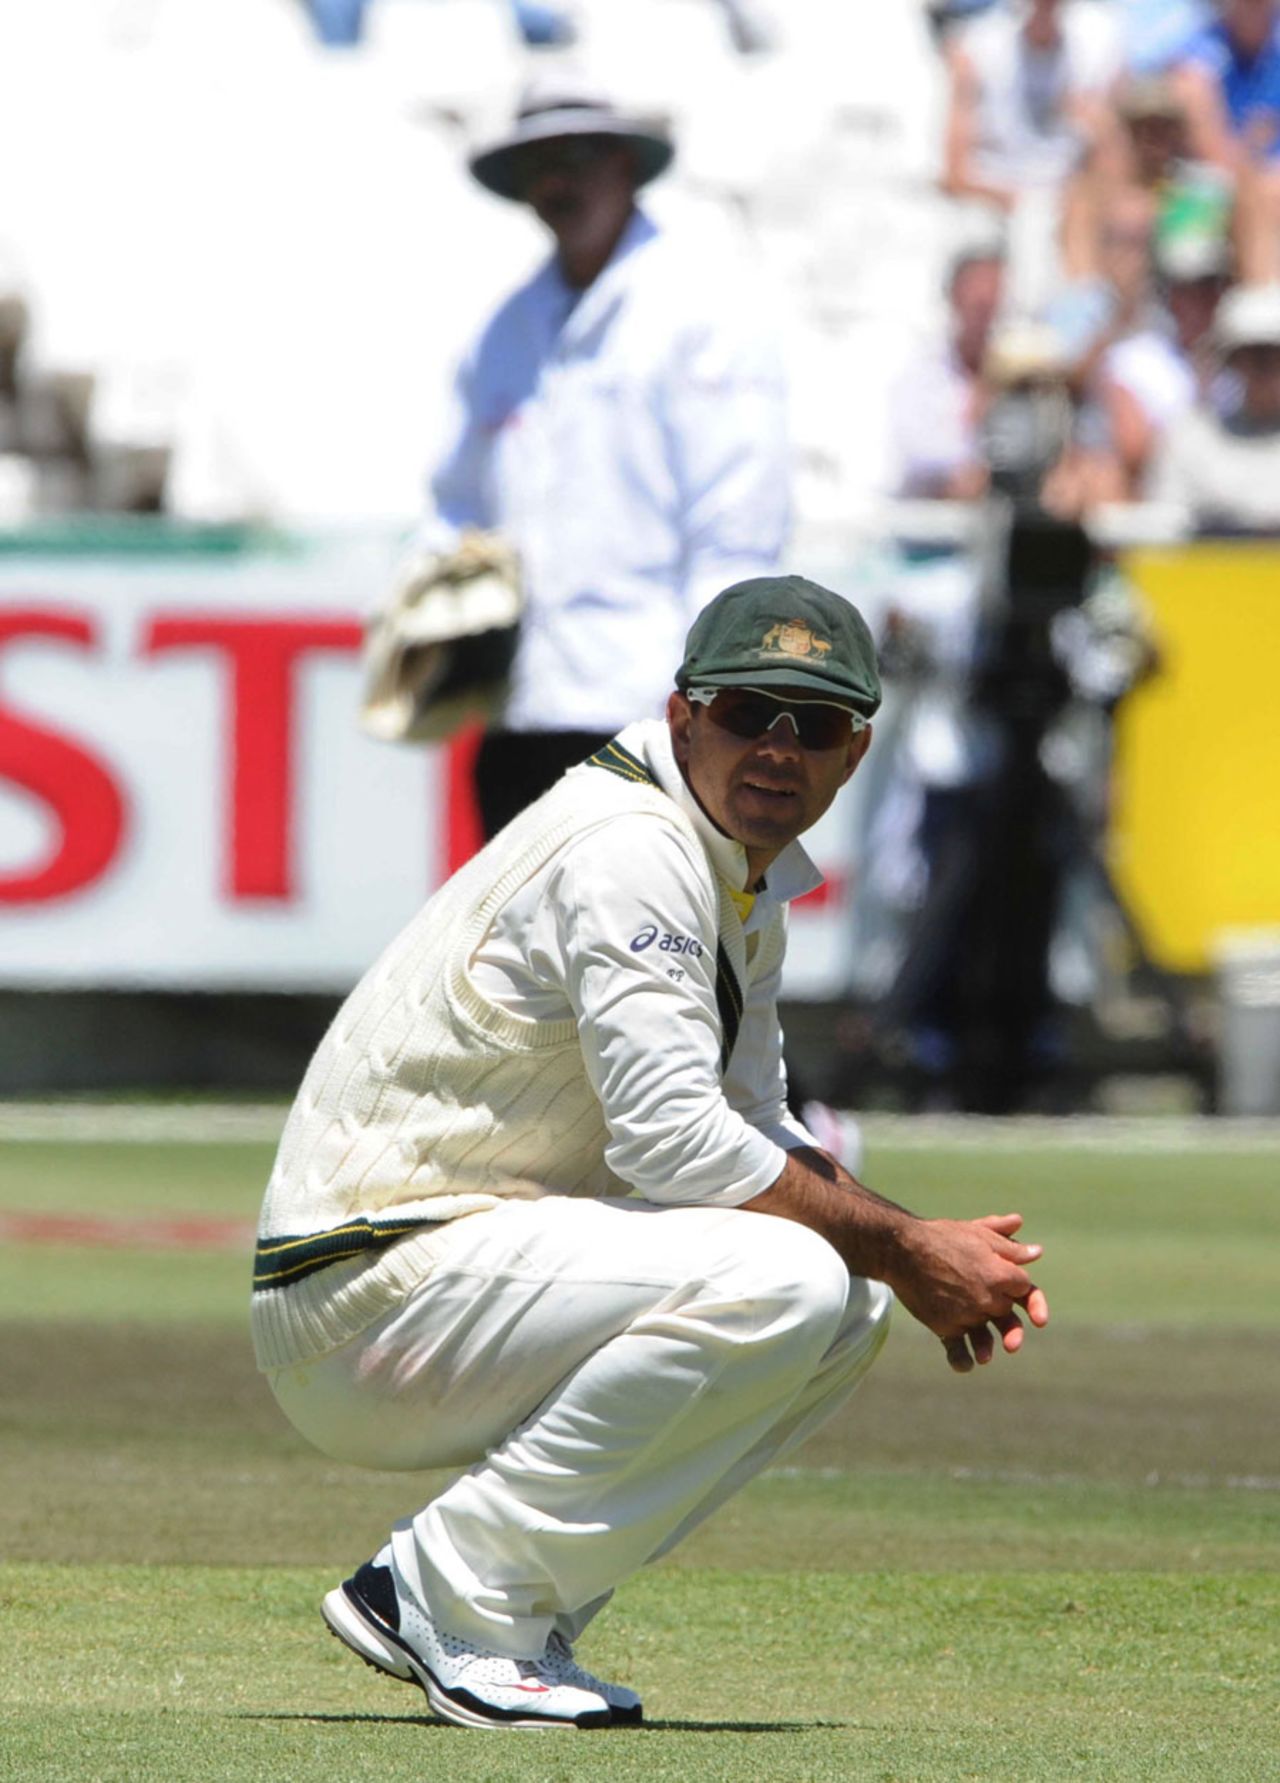 Ricky Ponting on his haunches as Australia slump to a loss, South Africa v Australia, 1st Test, Cape Town, 3rd day, November 11, 2011